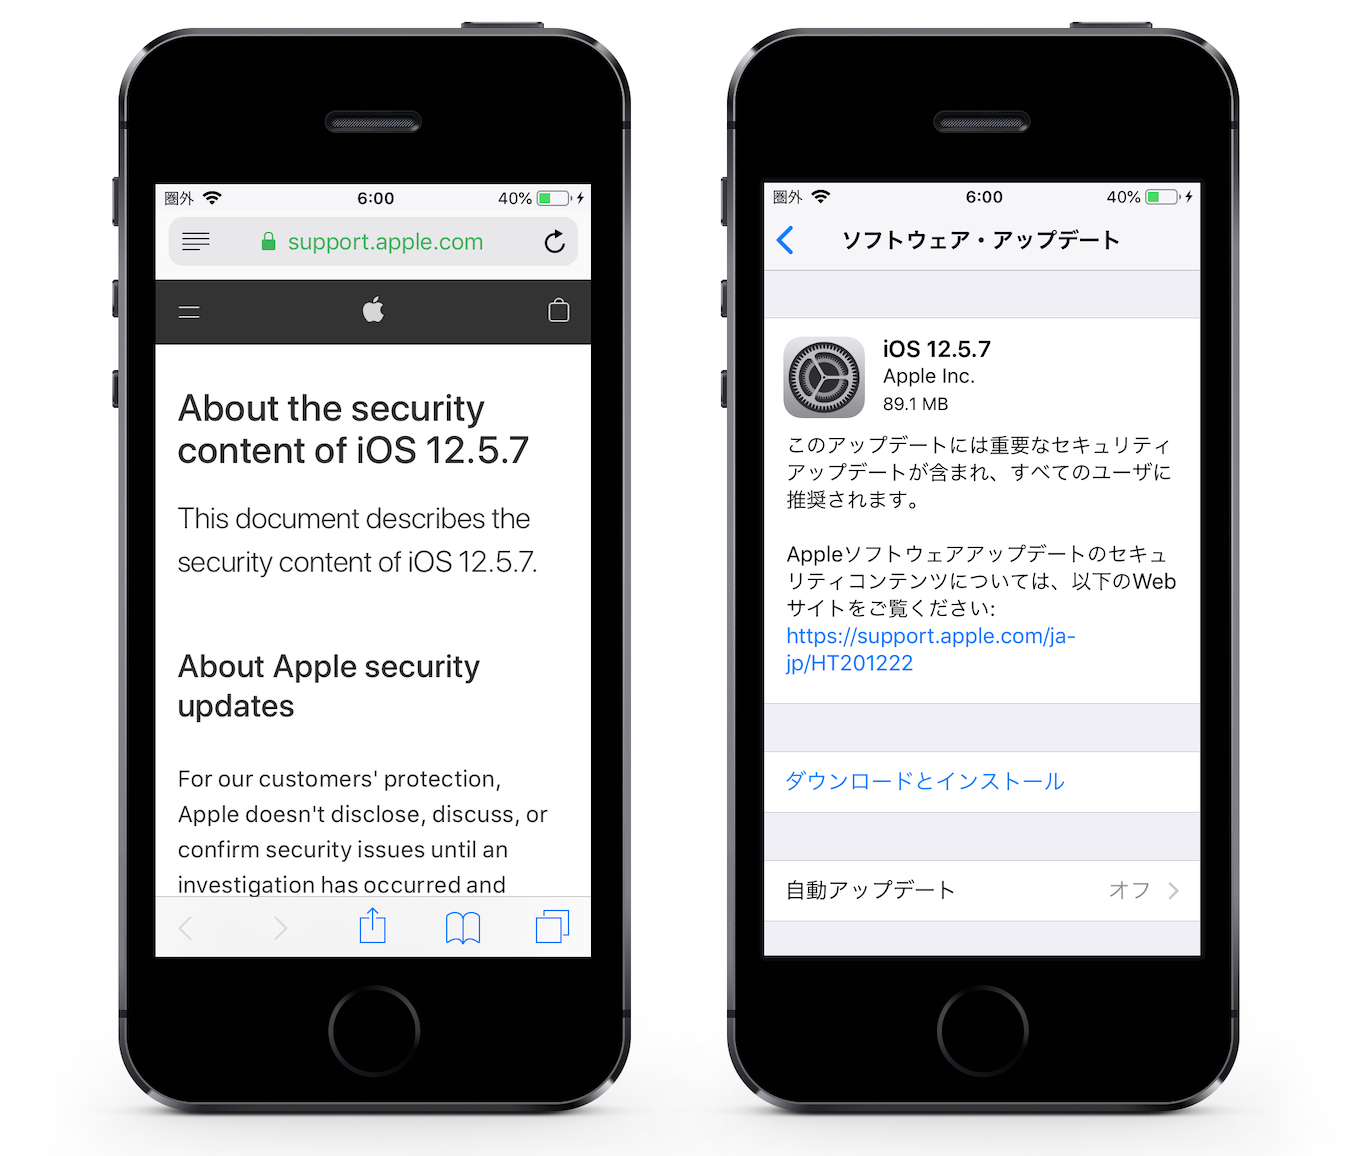 About the security content of iOS 12.5.7